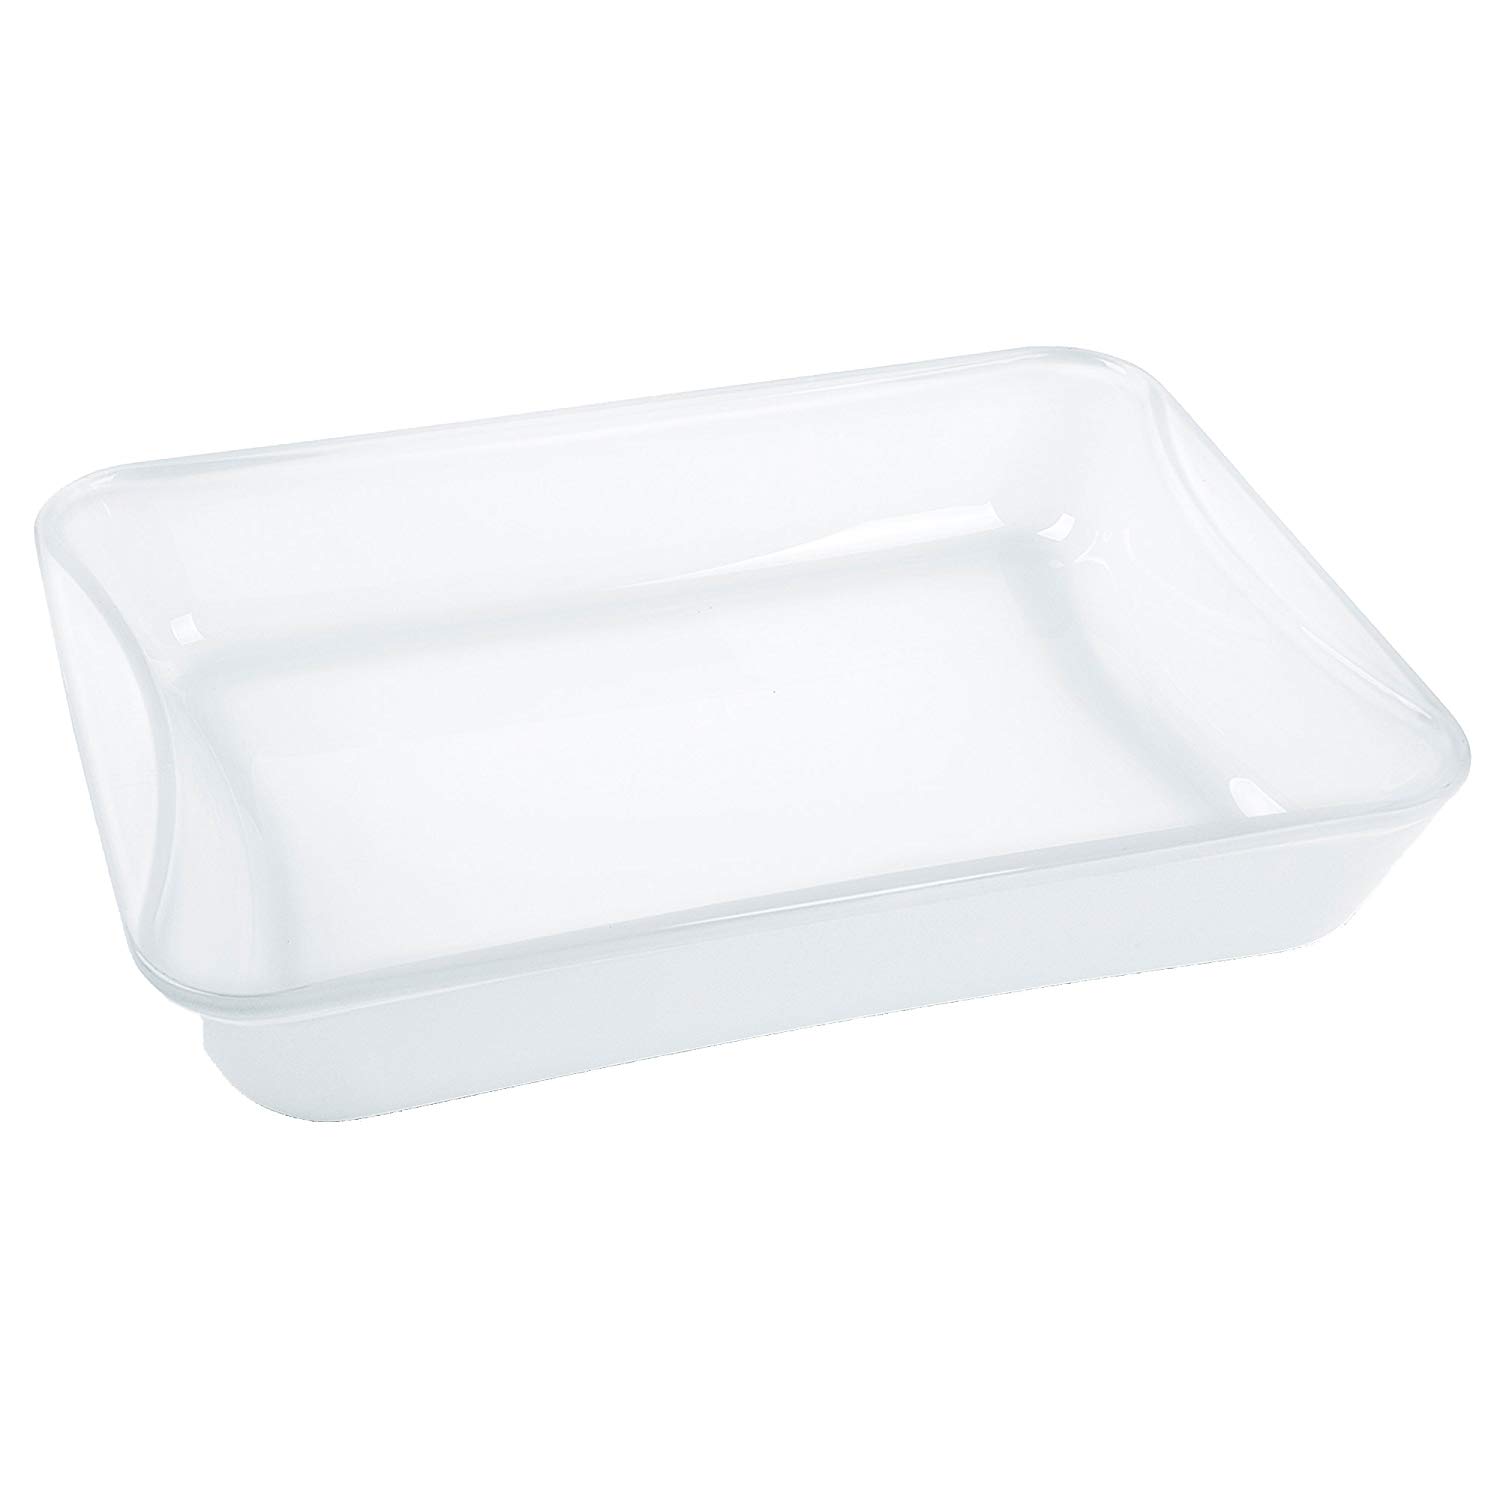 Bohemia Cristal 093 012 309 Play Of Colors Cooking Frying And Baking Dish R